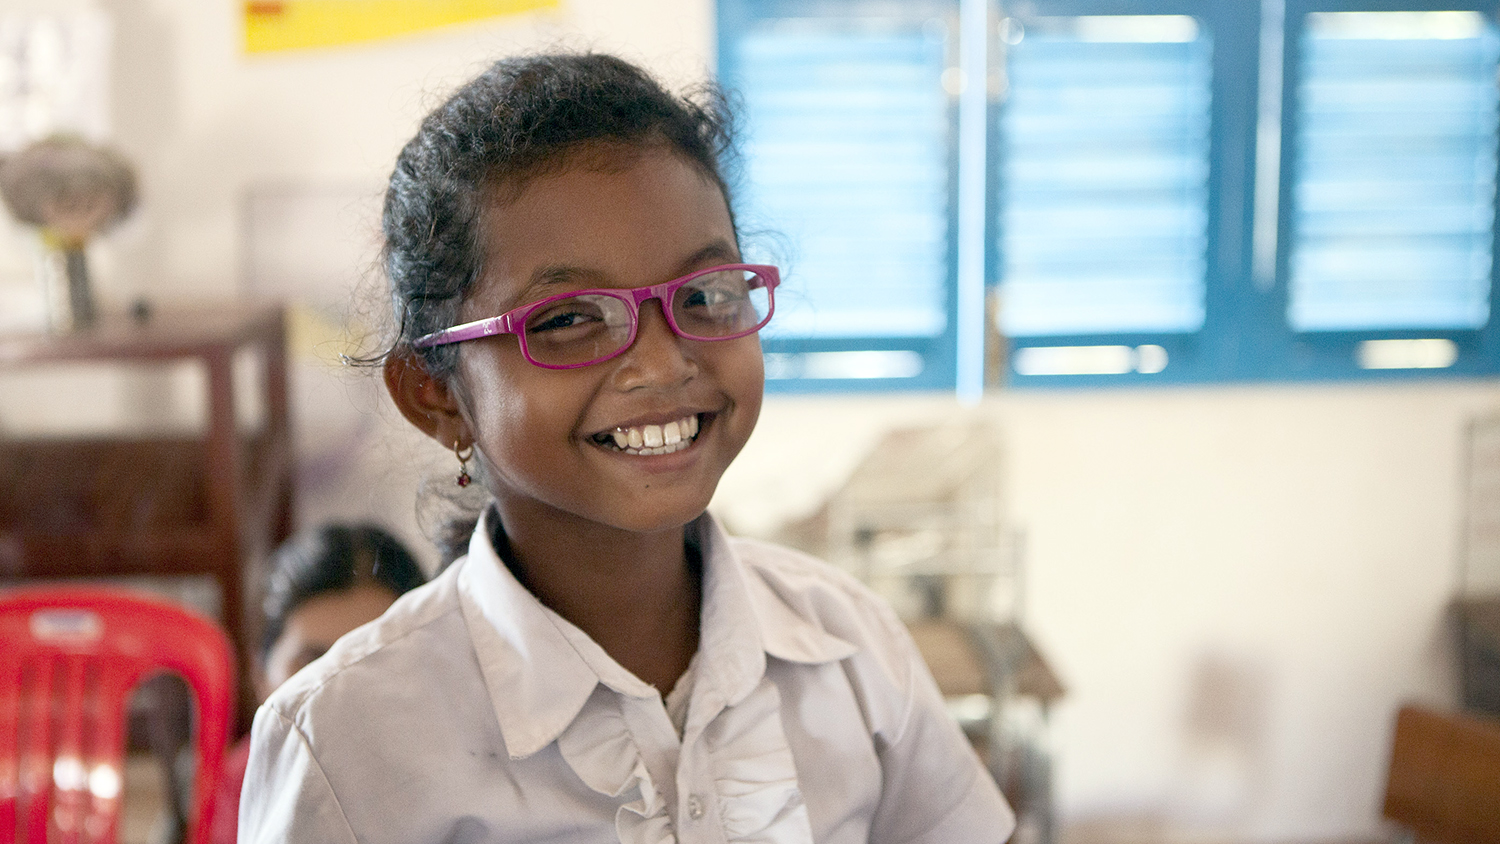 Glasses: a simple way to make learning easier for many children | Blogs